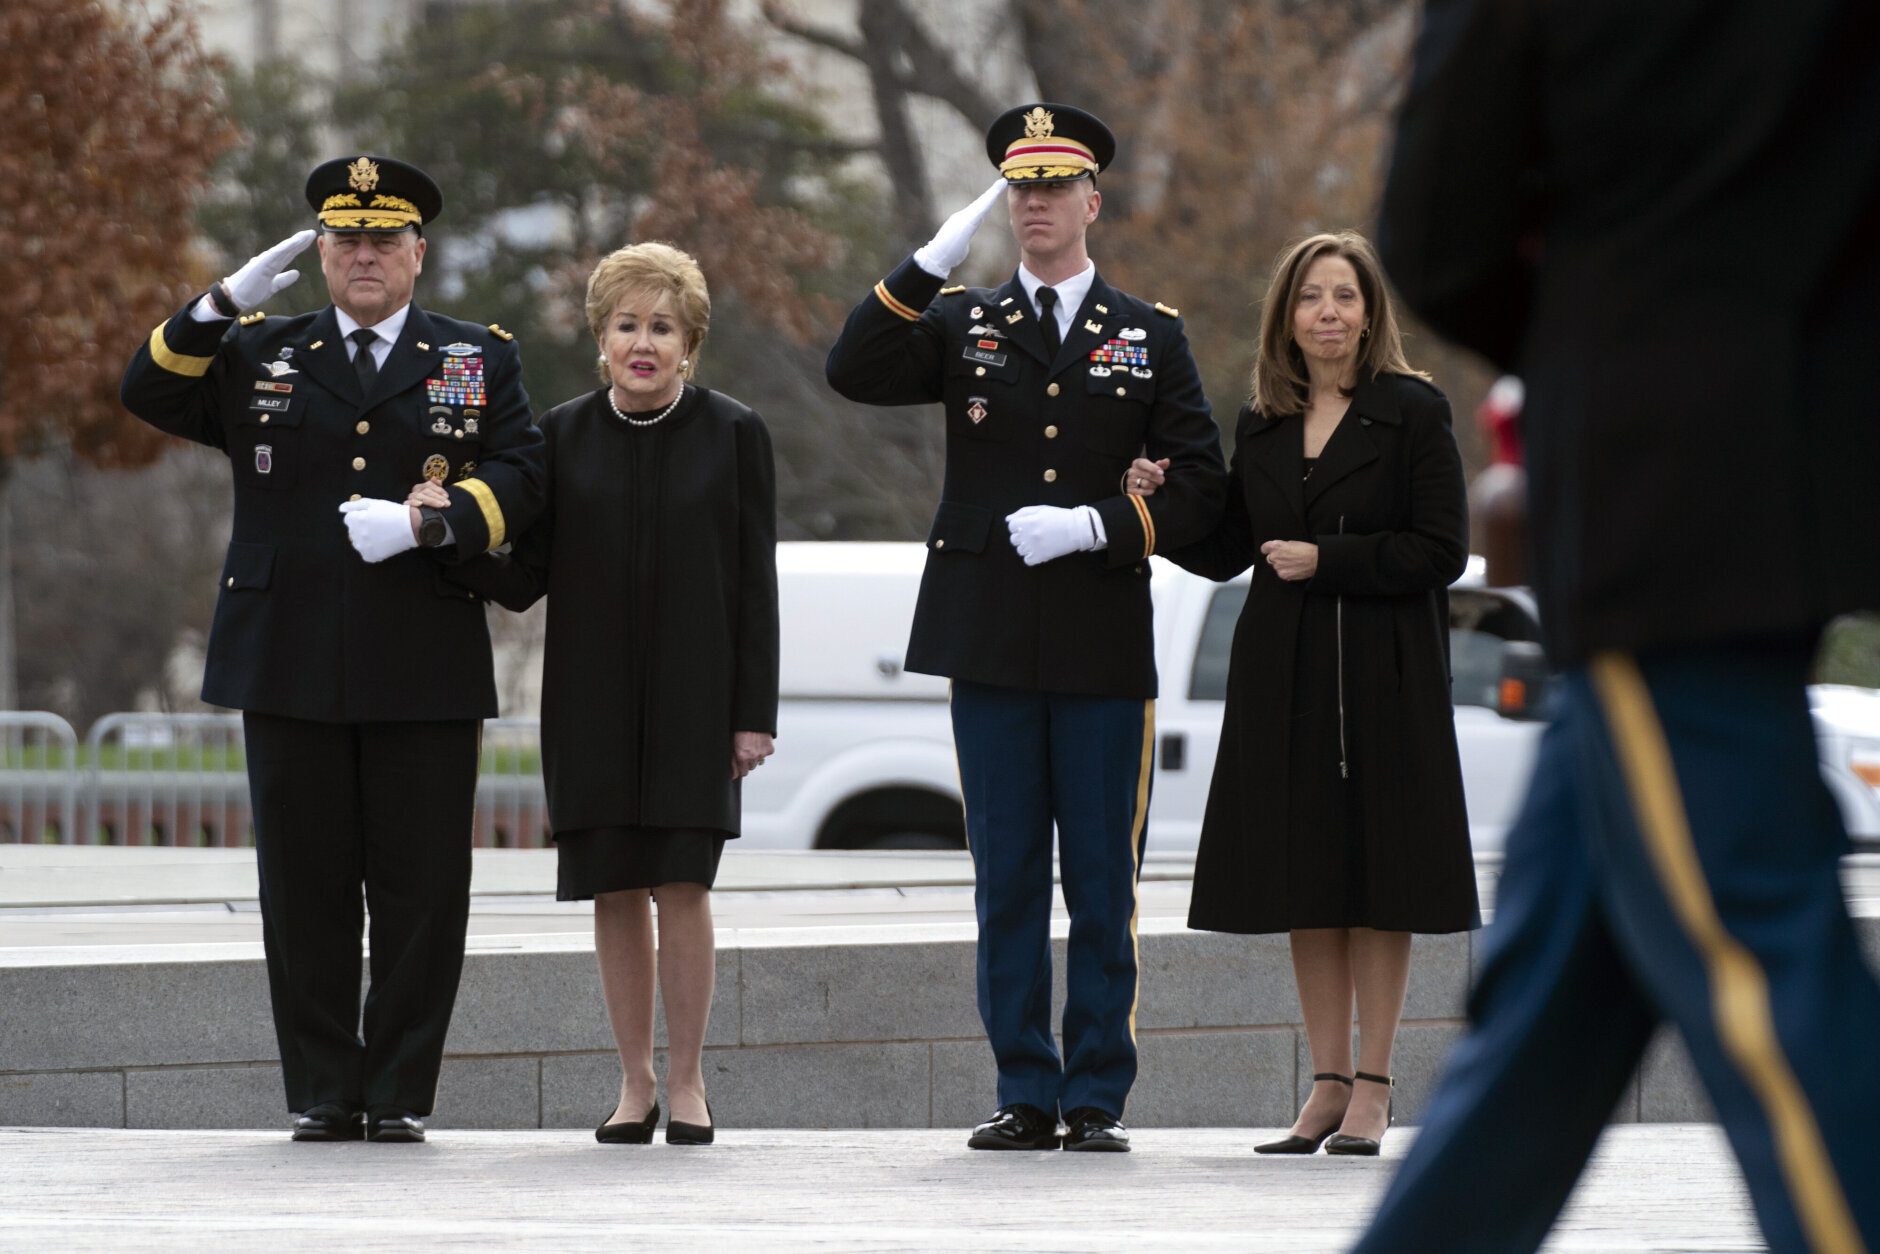 Former Sen. Elizabeth Dole, second left, accompanied with Joint Chiefs of Staff Chairman Marine General Mark Milley and Robin Dole, watch a military honor guard carry the flag-draped casket of former Sen. Bob Dole of Kansas, from the Capitol in Washington, Friday, Dec. 10, 2021, after lying in state. (Greg Nash/Pool via AP)